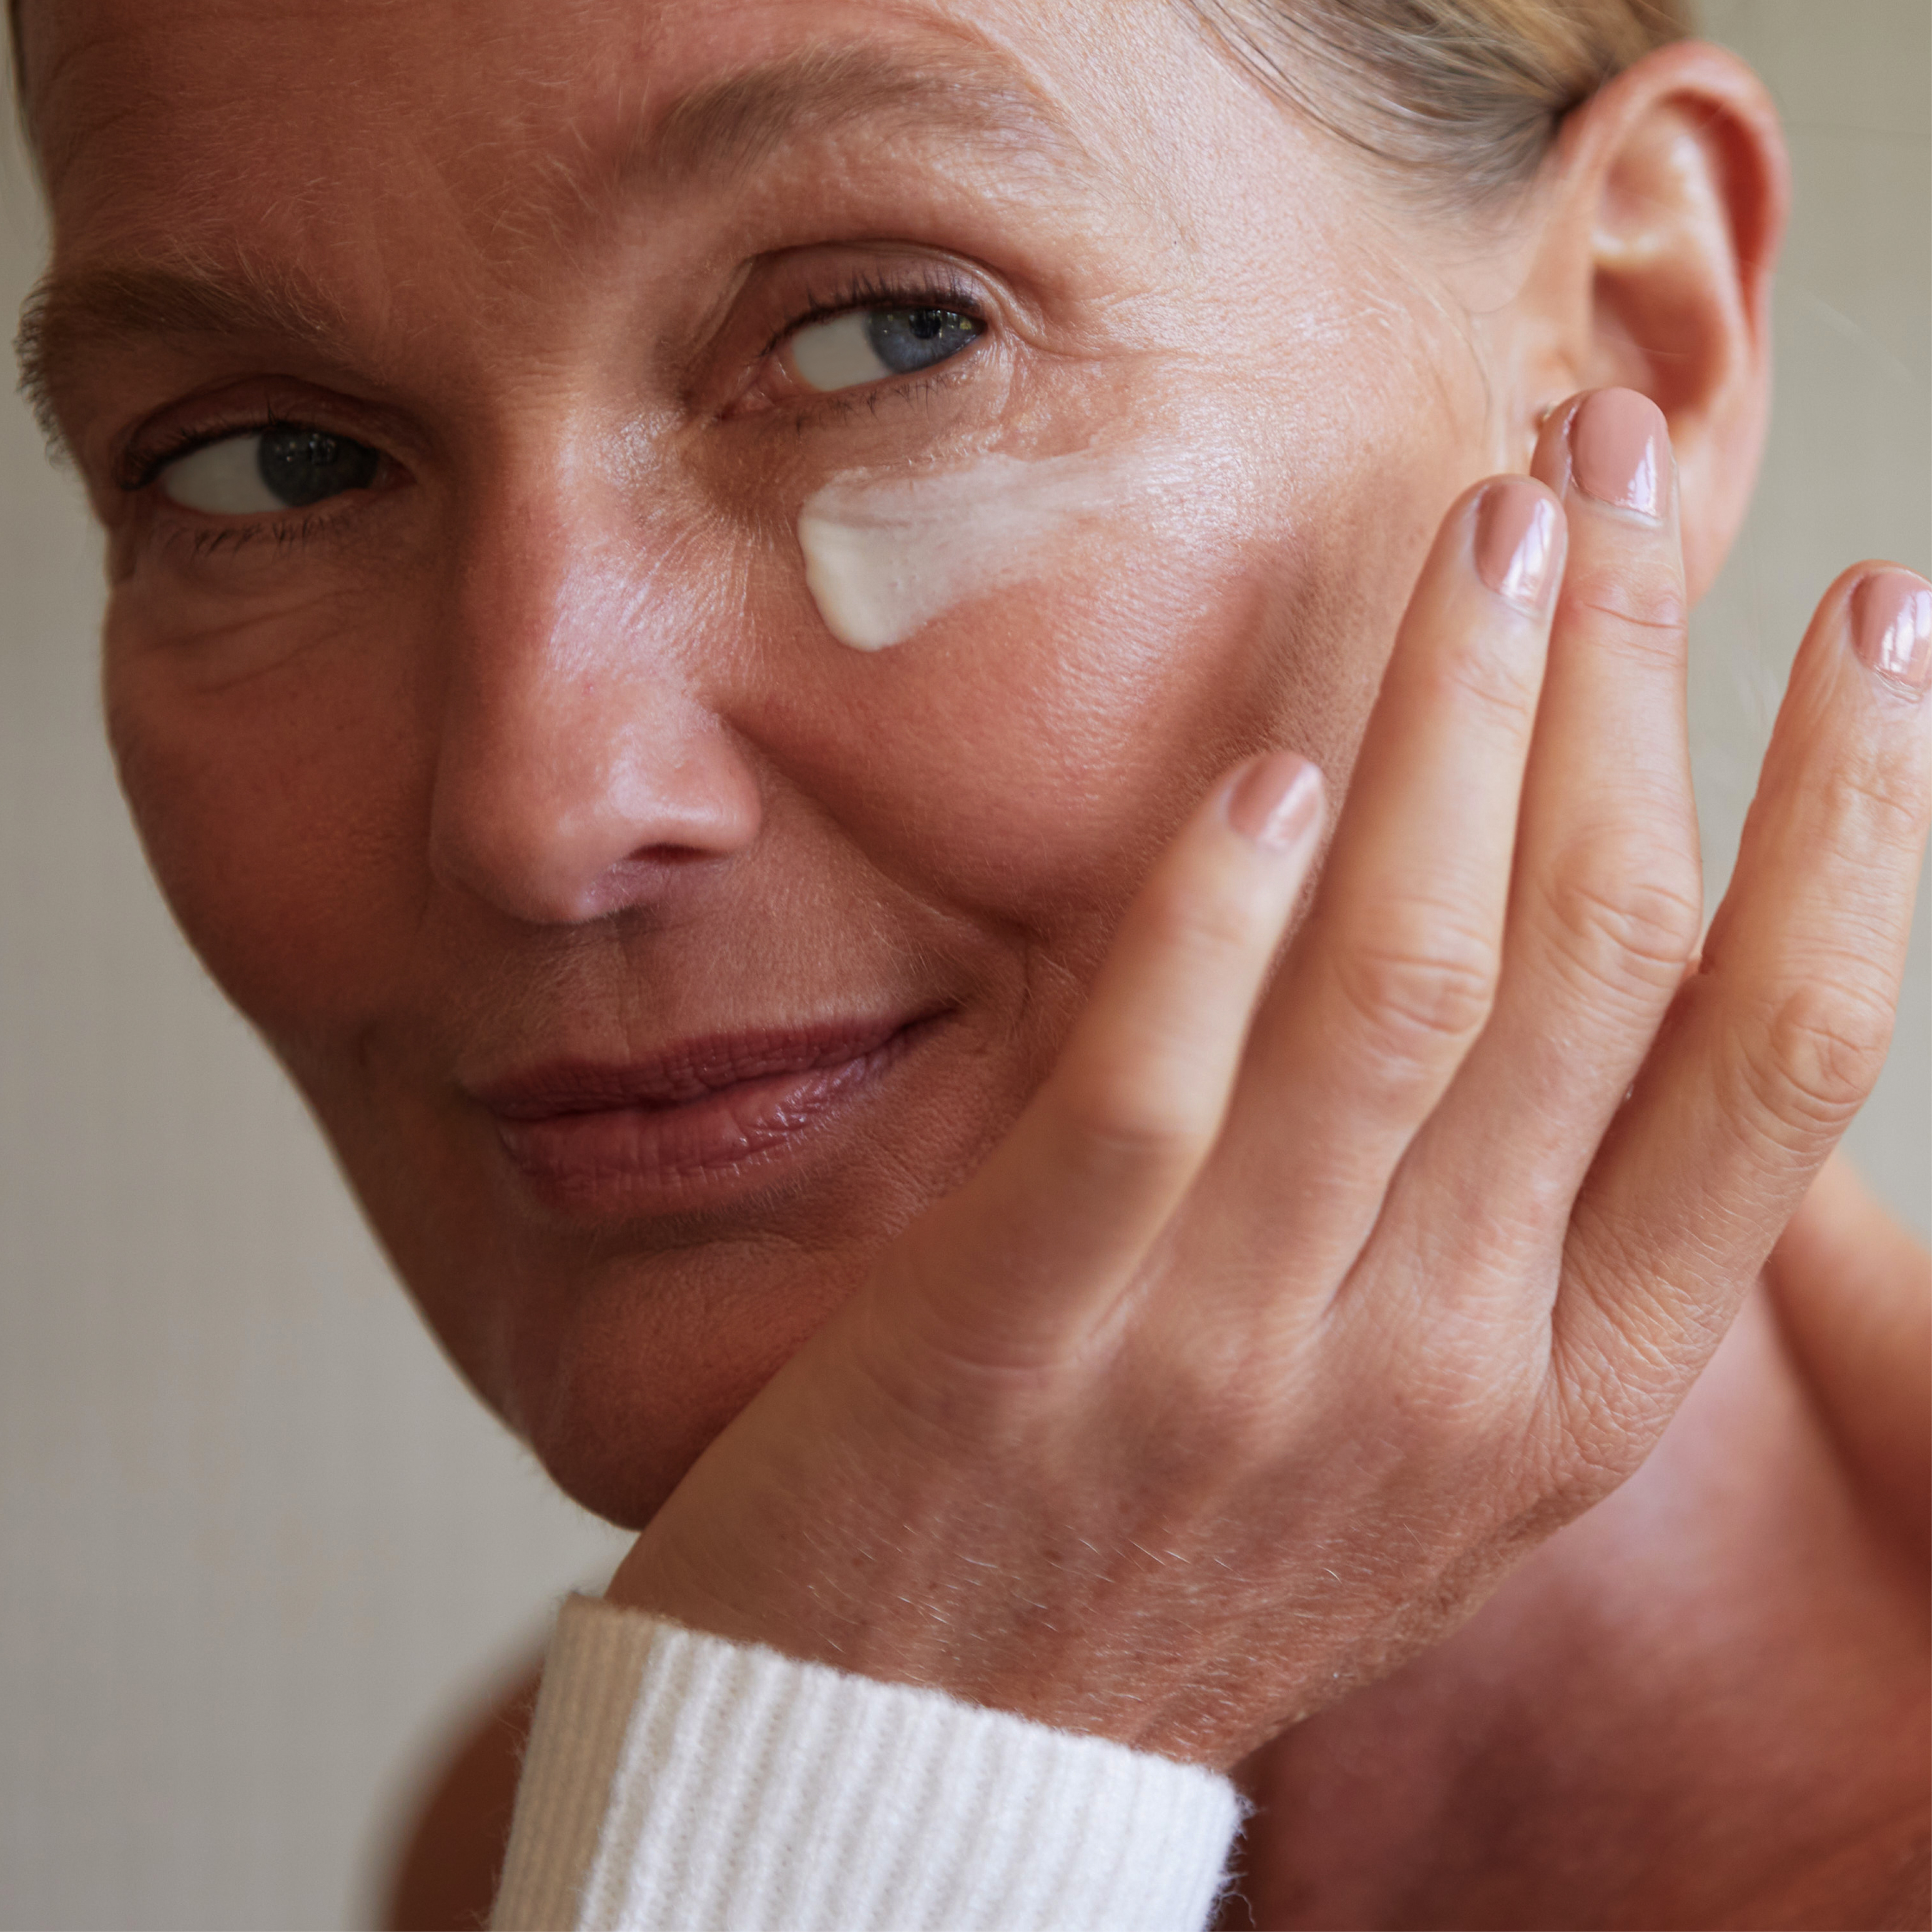 Person applying eye product to under eye area